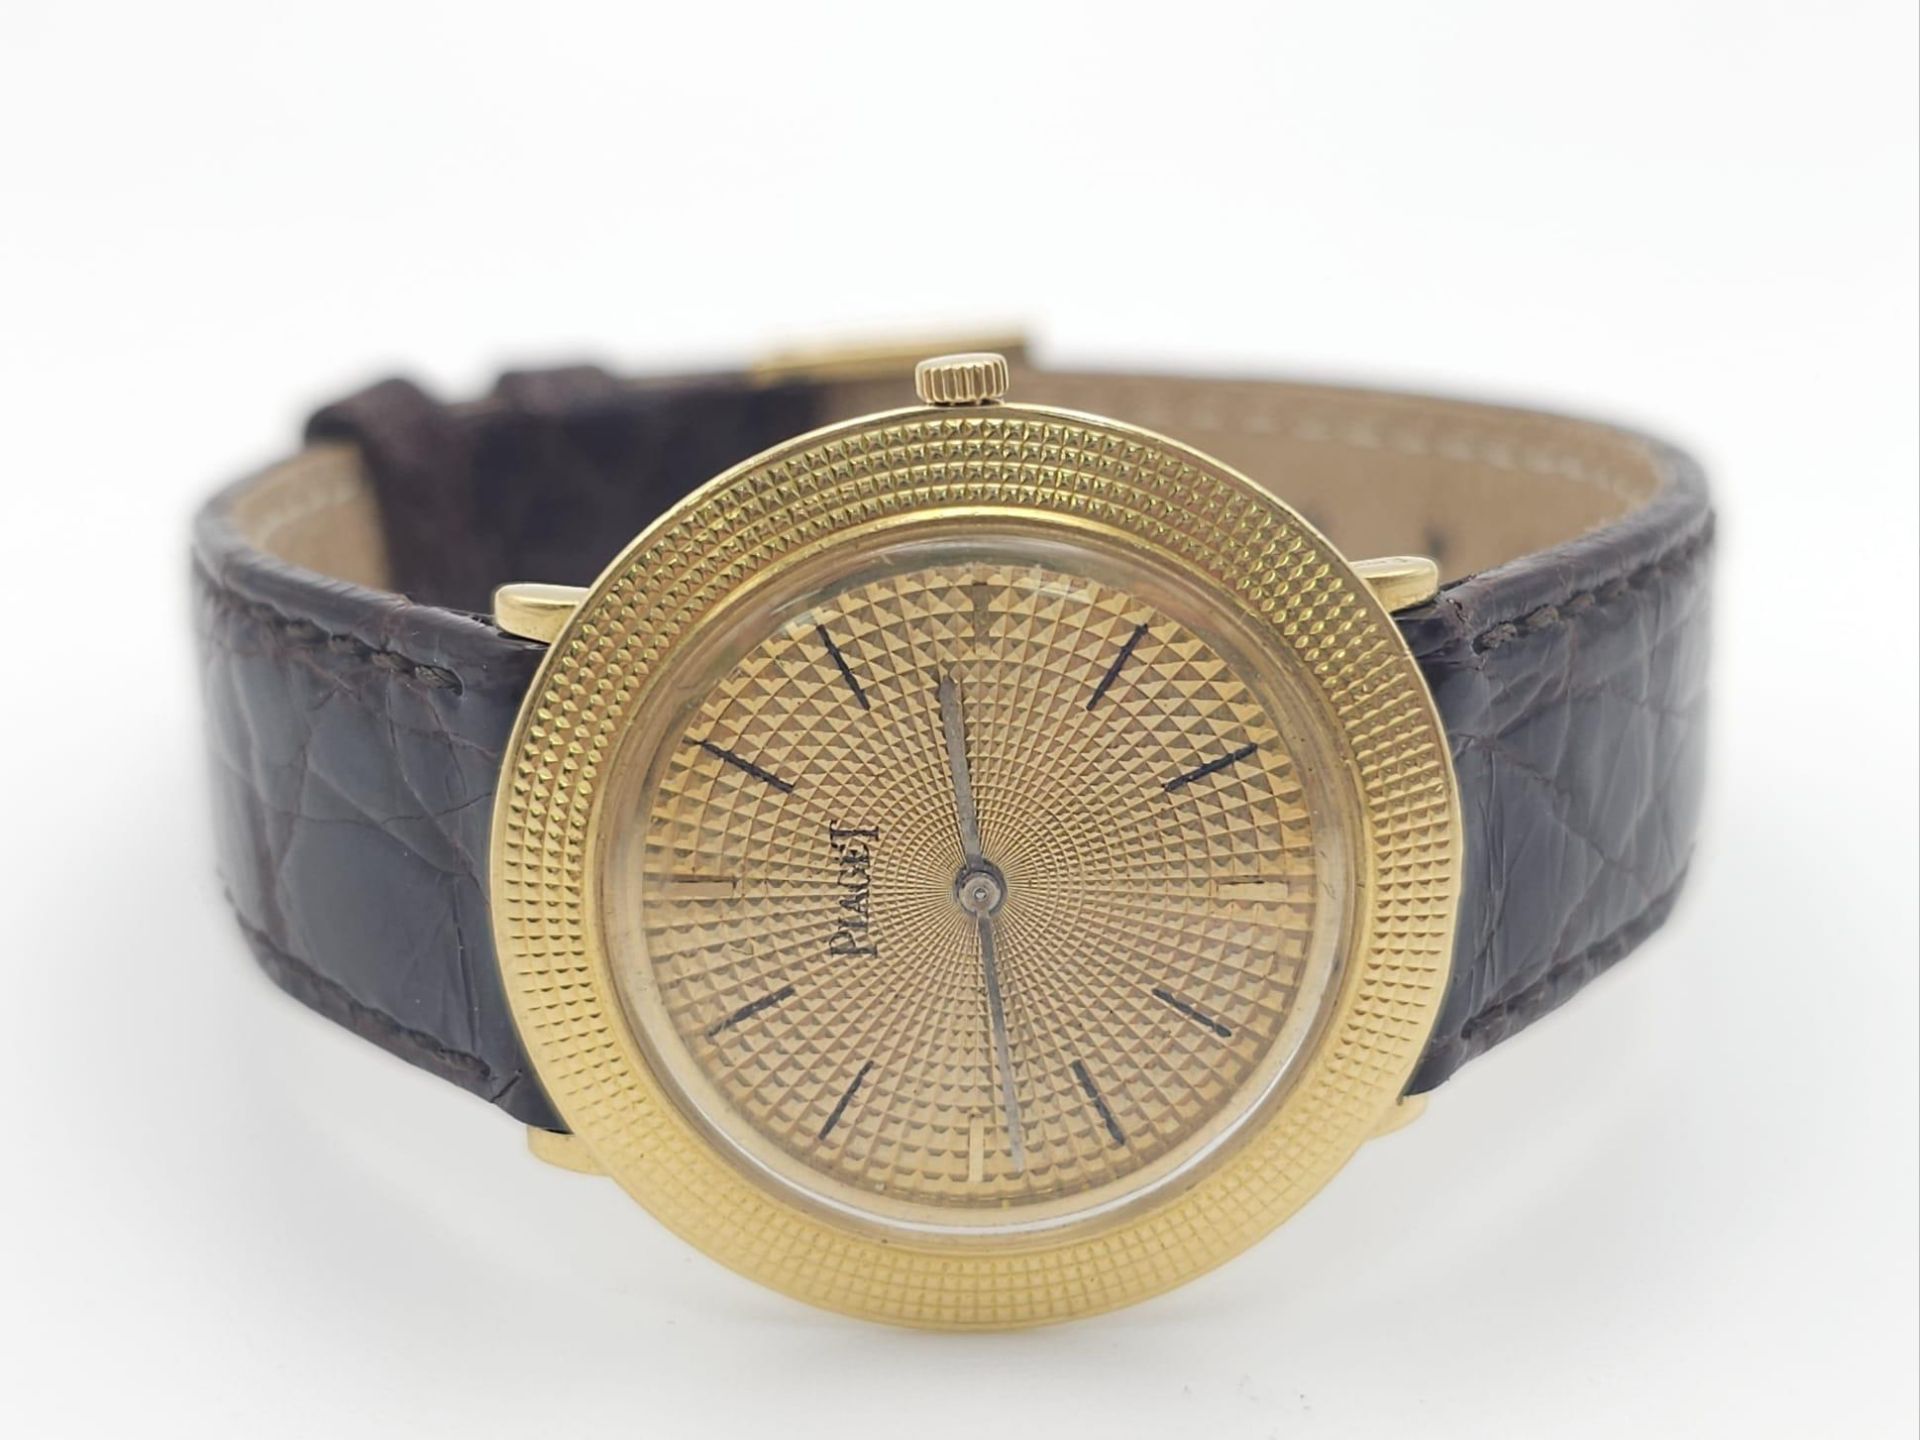 A Vintage 18K Gold Piaget Gents Watch with Hypnotic Dial. Brown crocodile strap. 18k gold case - - Image 9 of 25